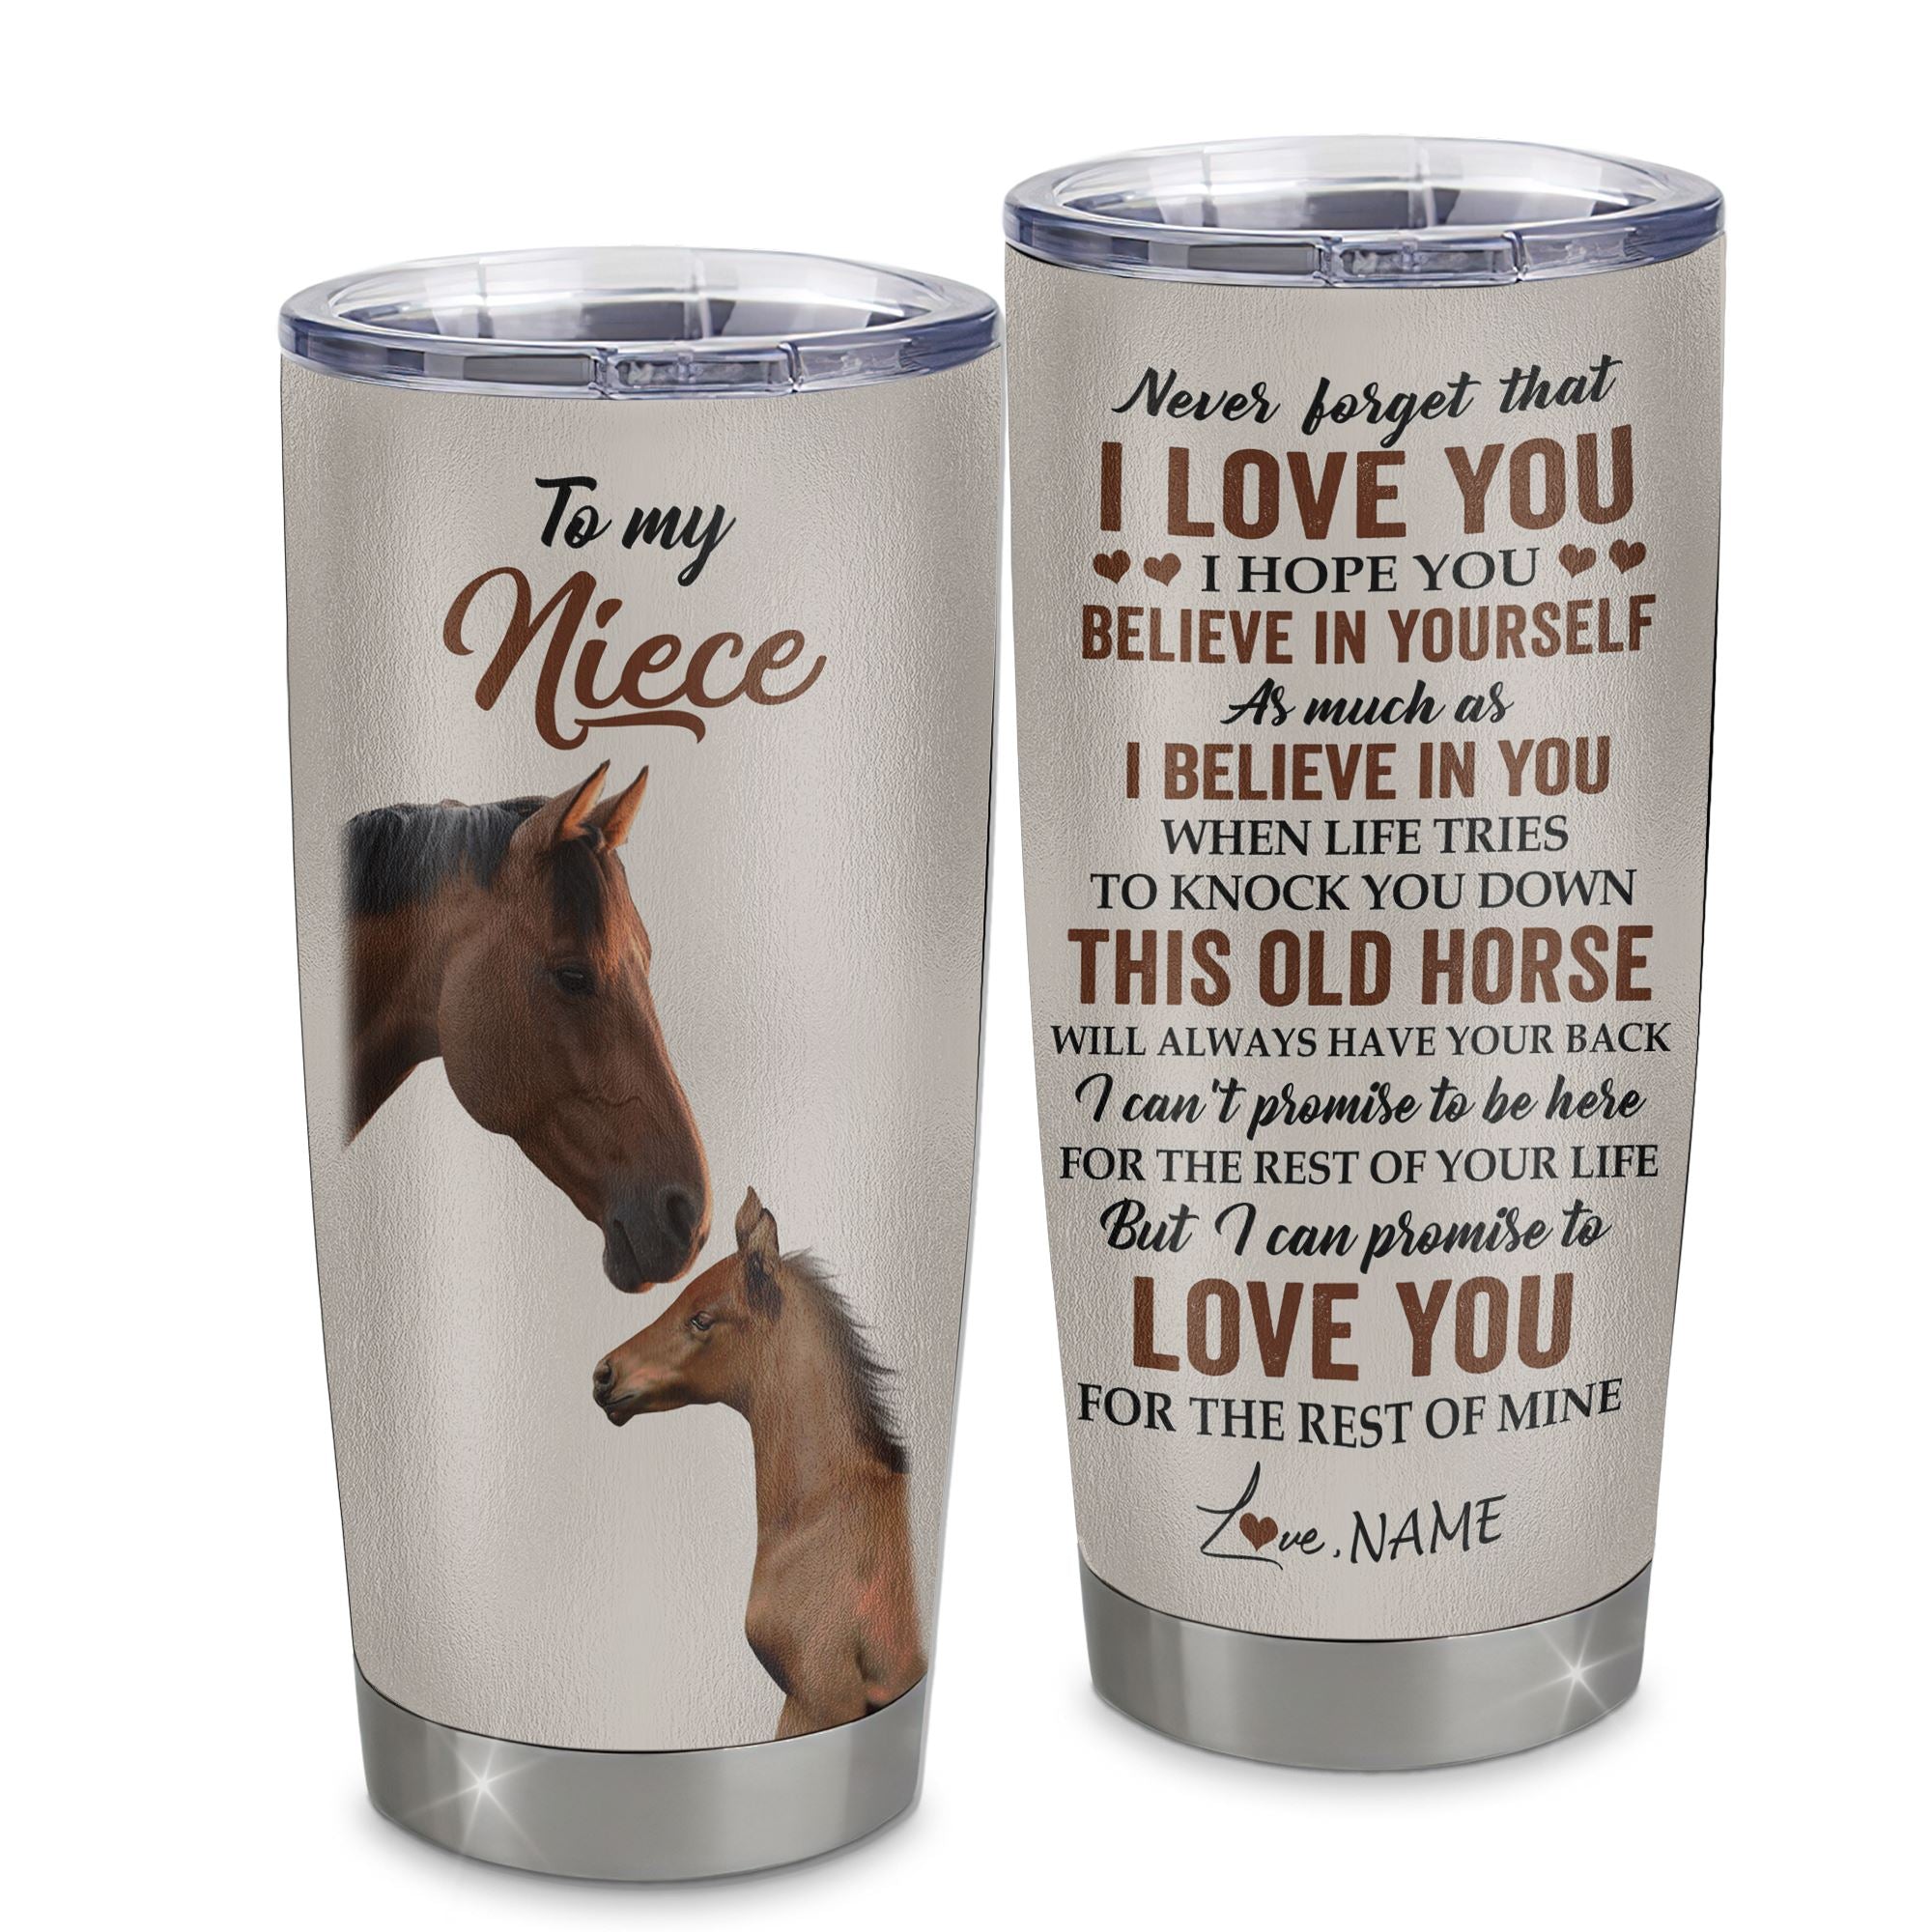 Personalized_To_My_Niece_Tumbler_From_Aunt_Auntie_Uncle_Stainless_Steel_Cup_This_Old_Horse_Love_You_Niece_Birthday_Graduation_Christmas_Custom_Travel_Mug_Tumbler_mockup_1.jpg